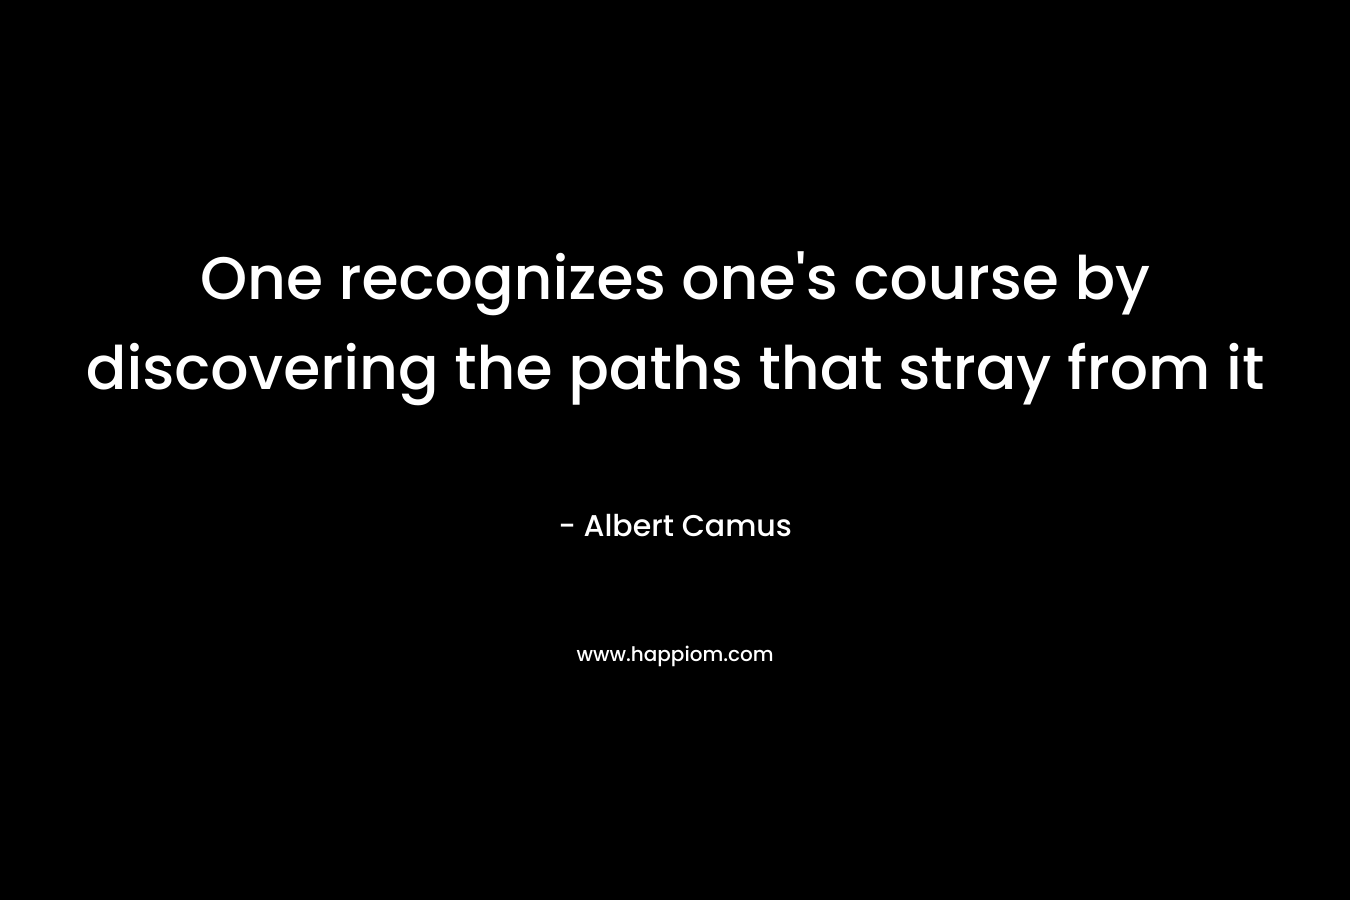 One recognizes one’s course by discovering the paths that stray from it – Albert Camus